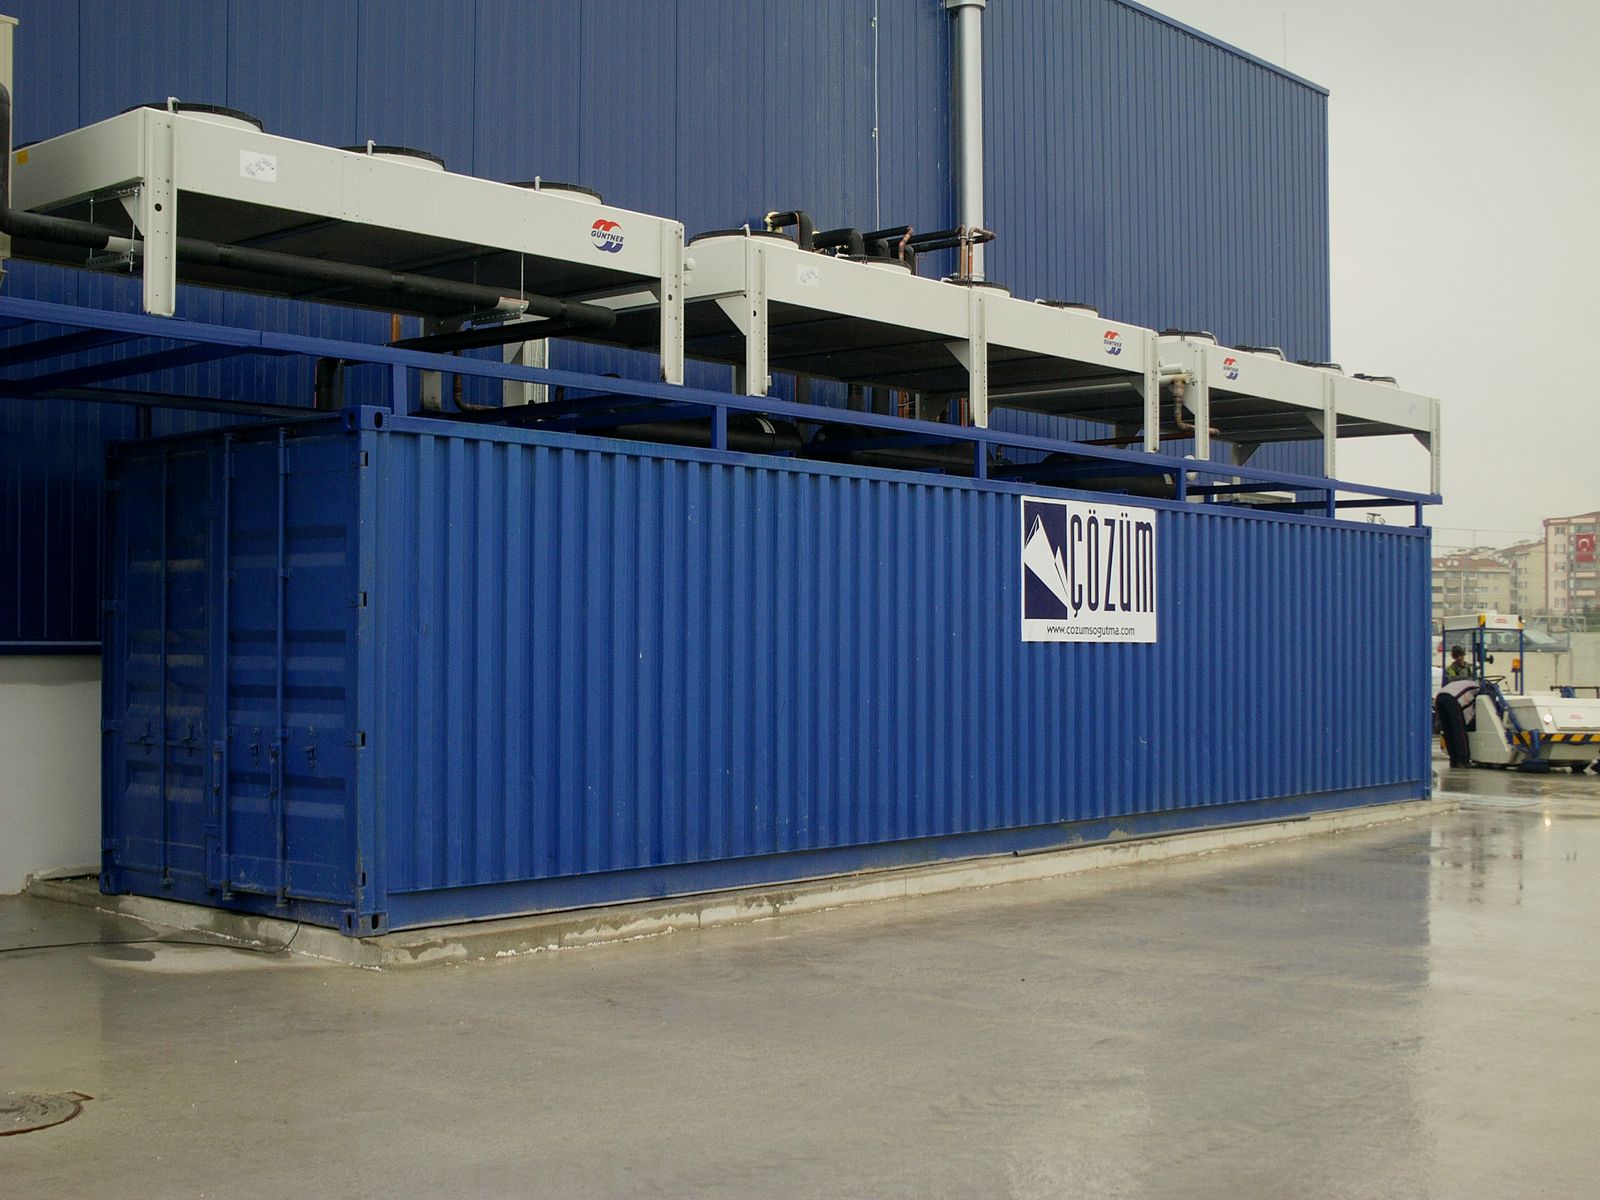 is a company specializing in the sales, design, installation and post-assembly technical services of cold storages. Its foundations were laid in 2005 in Istanbul, Turkey. Today, operating in 52 countries on 4 different continents, it is opening up to new markets every day. It realizes 70% of its annual turnover through exports. It provides services in almost every segment of the cold chain in Turkey and abroad, including the cold storage needs of many different sectors and food production processes. Our worldwide group company COZUM, which provides quality service to its customers in after-sales service with its widespread service network, brings efficiency to different sectors with its refrigeration equipment.